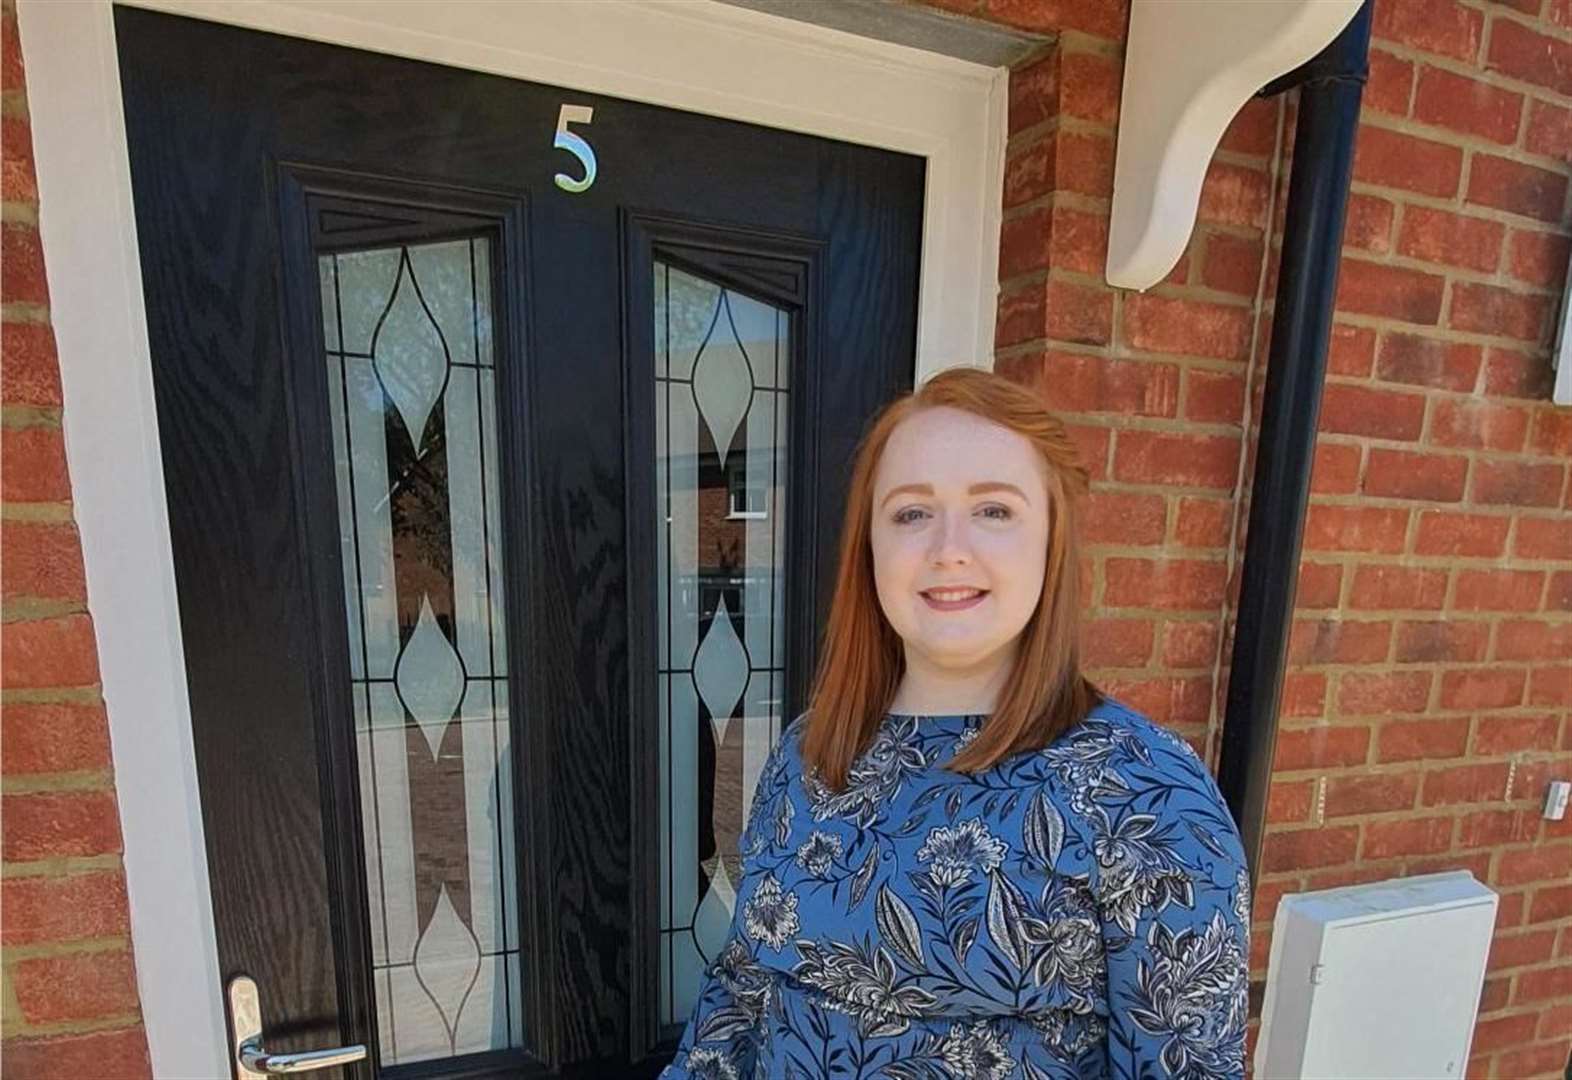 'I worked hard and held off having children - but I still can't buy a house'